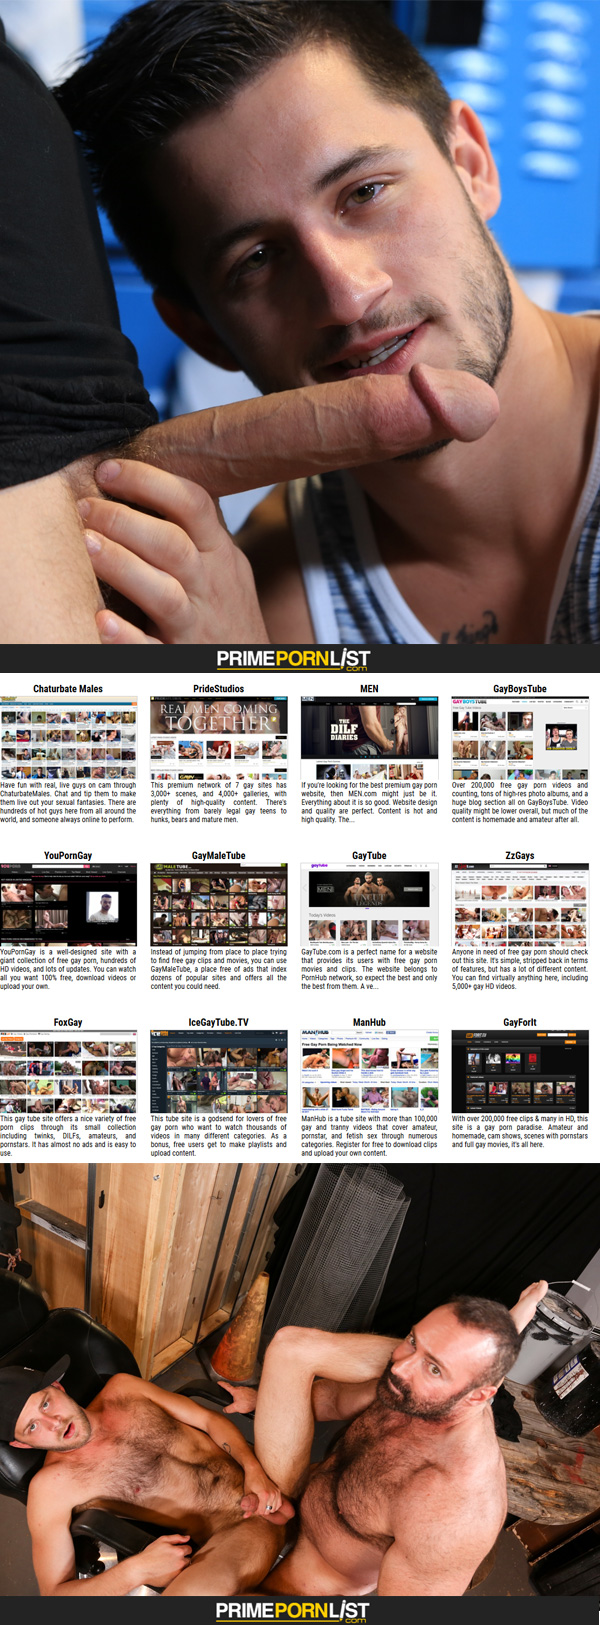 Prime Porn List - Your Favorites Sites Ranked and Categorized picture